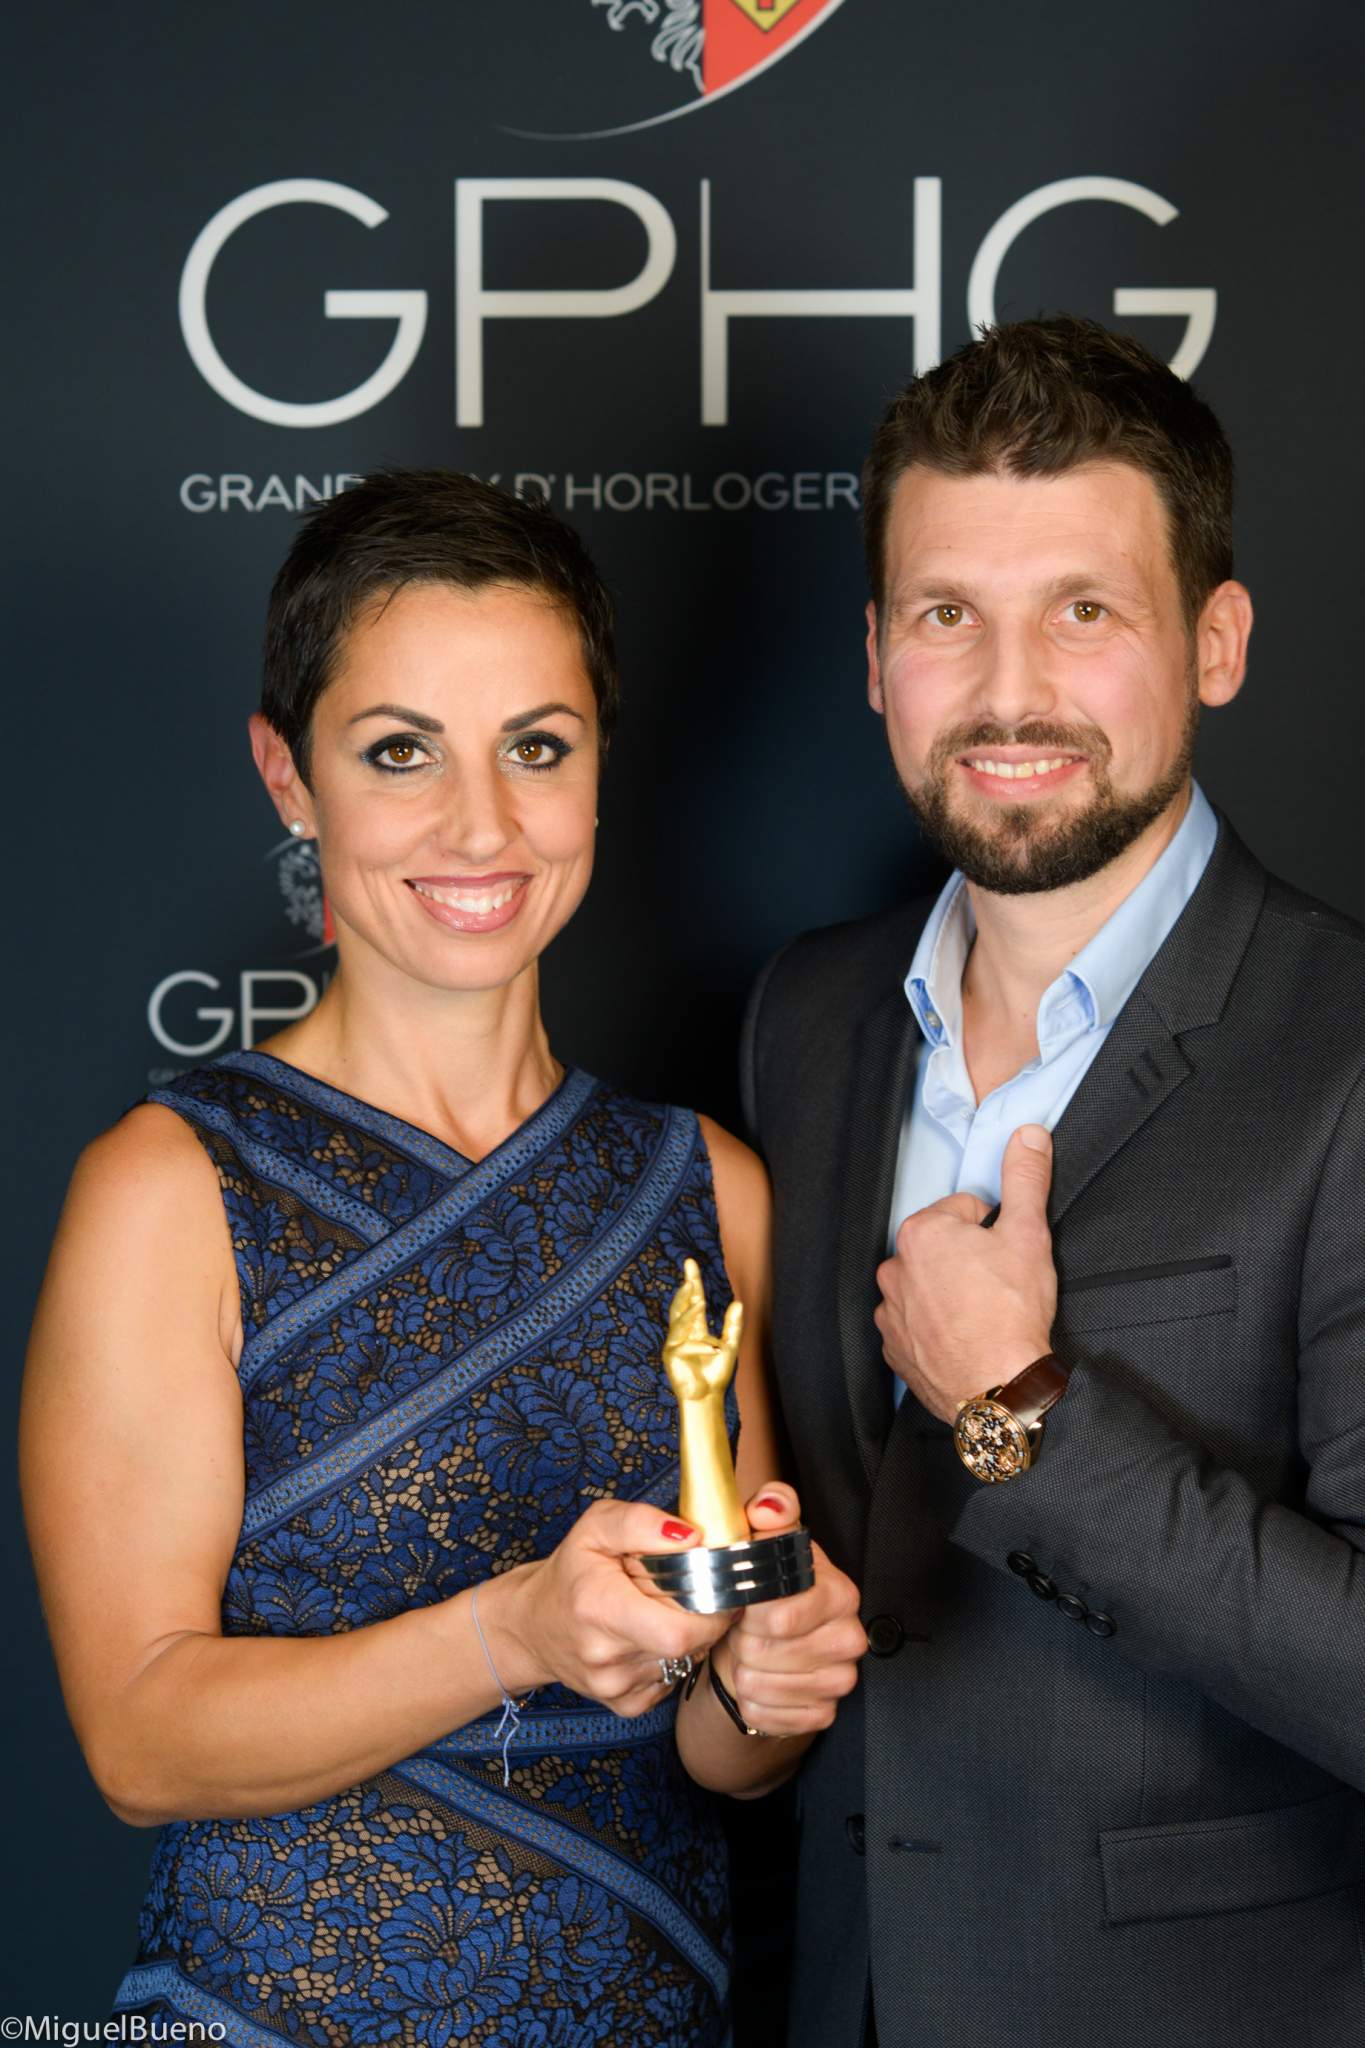 Co-founders of Genus, winners of the Mechanical Exception Watch Prize 2019